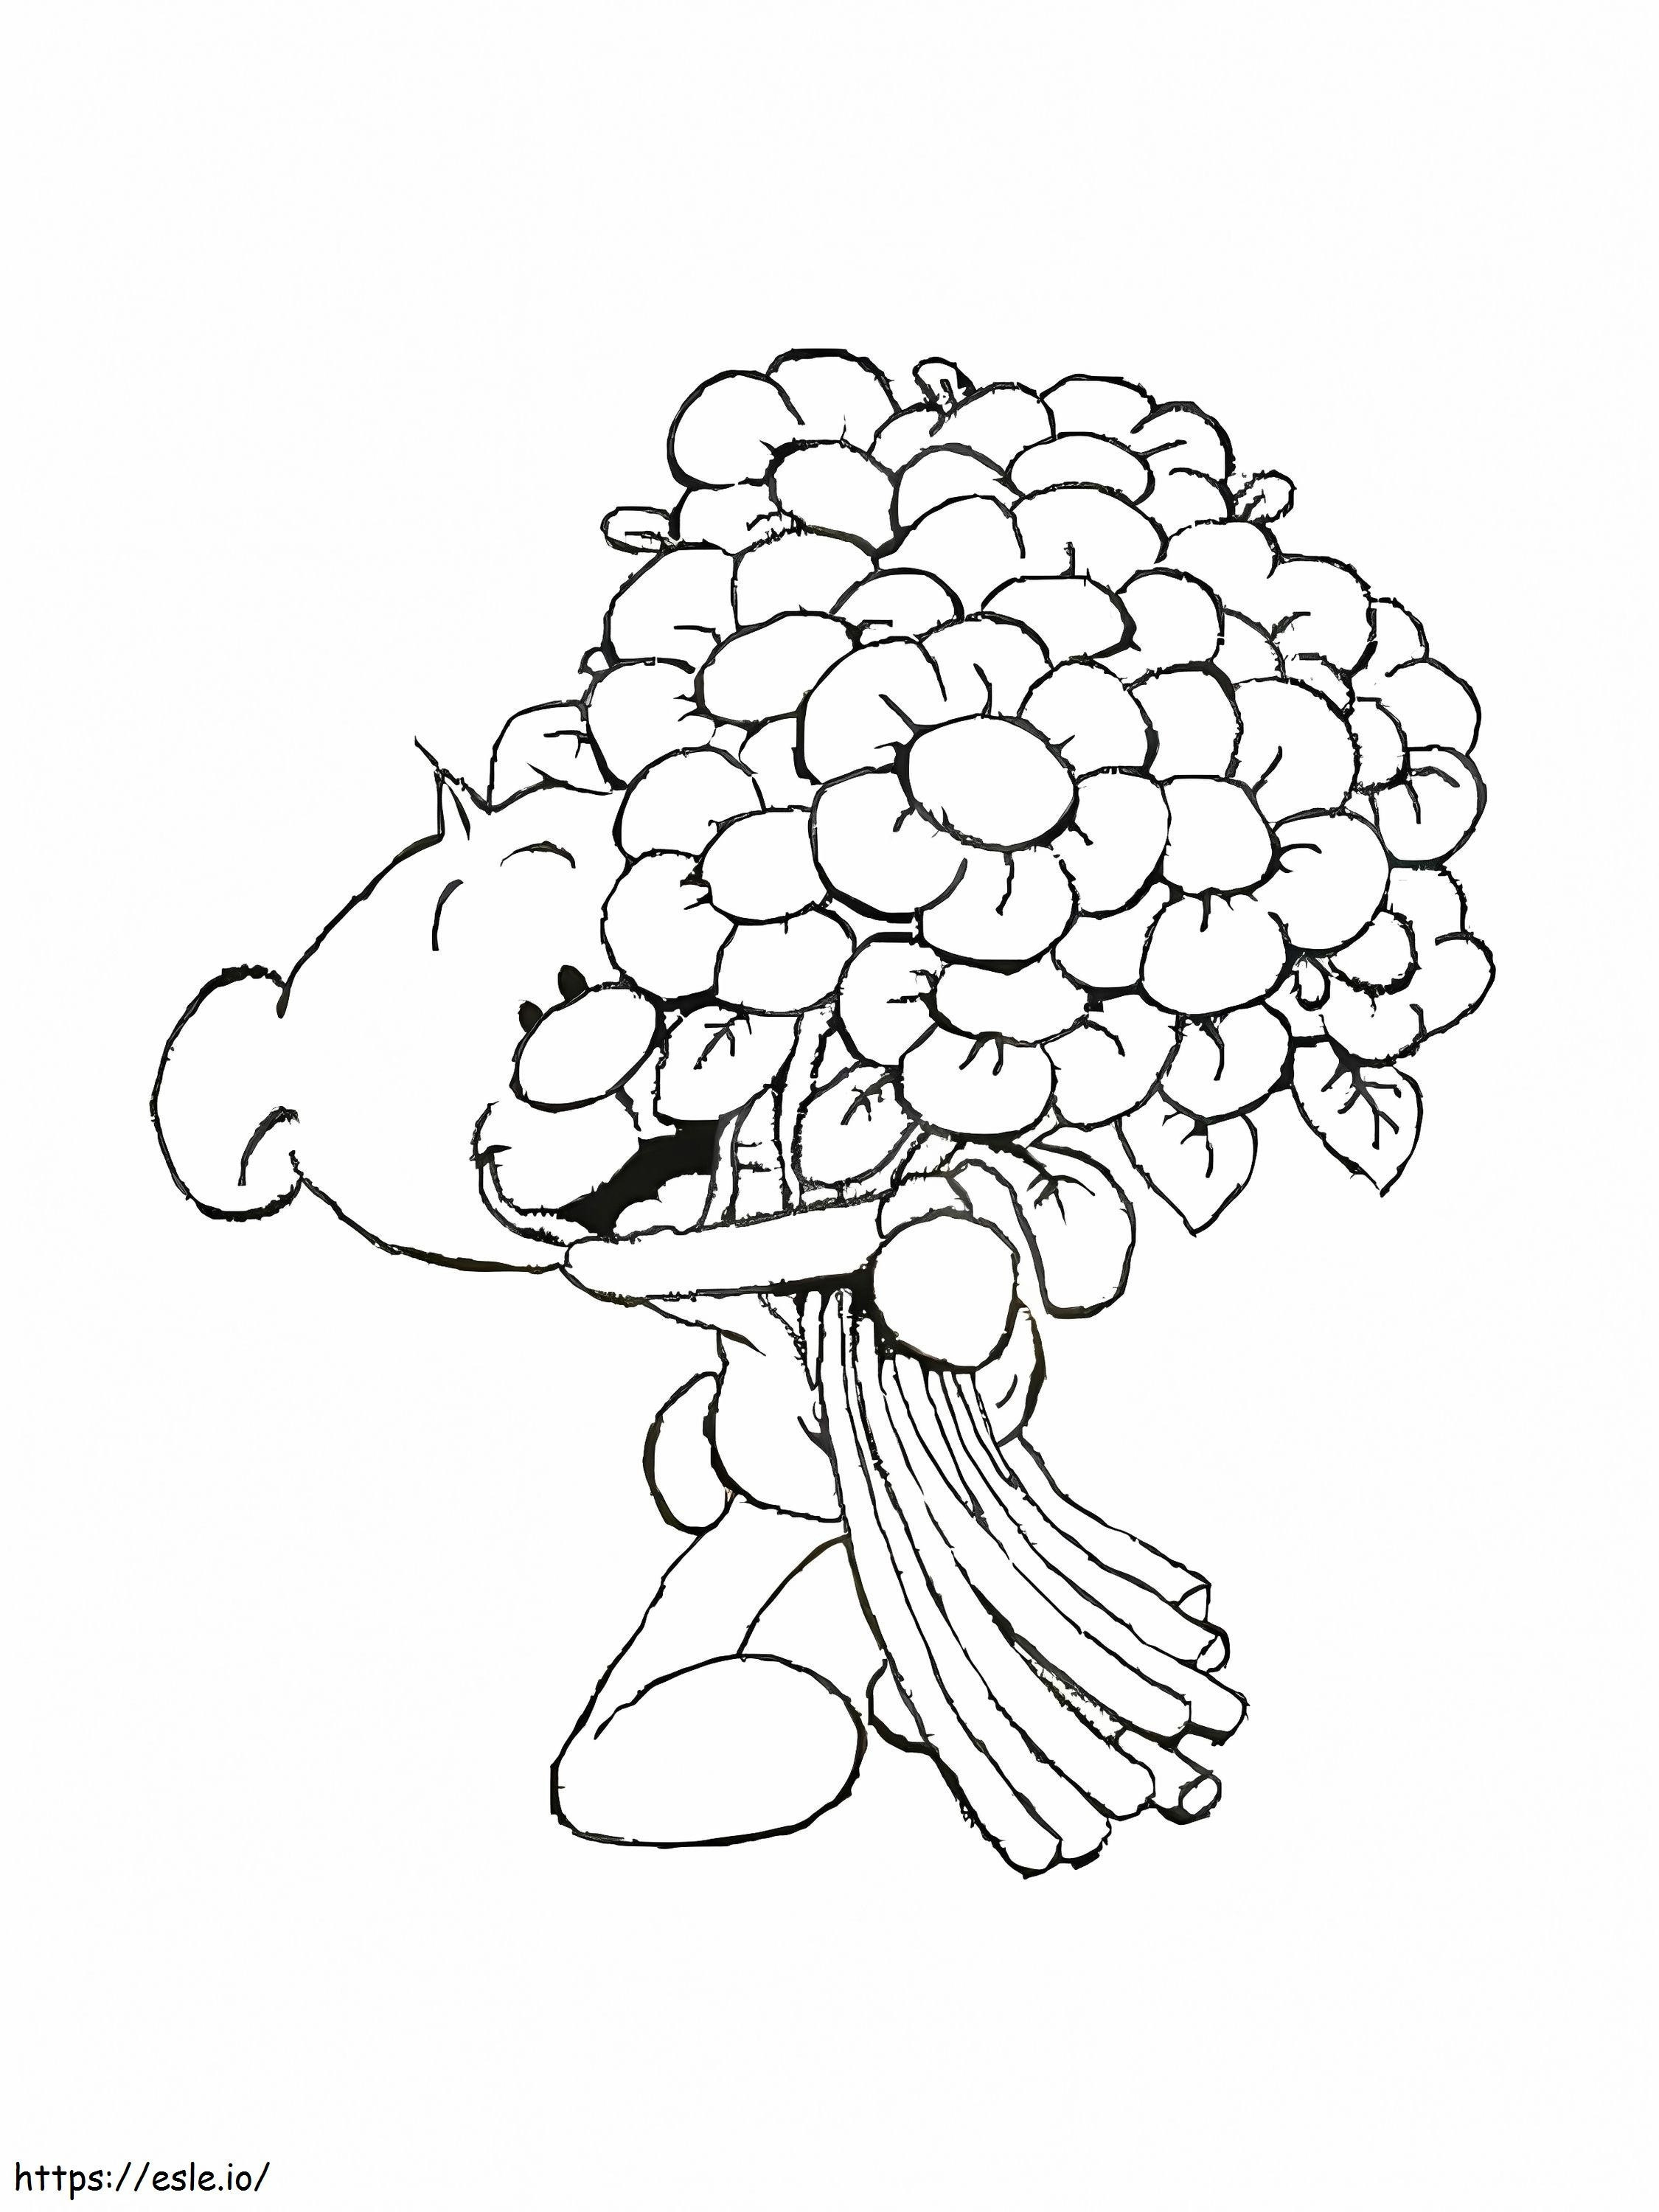 Pimboli With Flowers coloring page